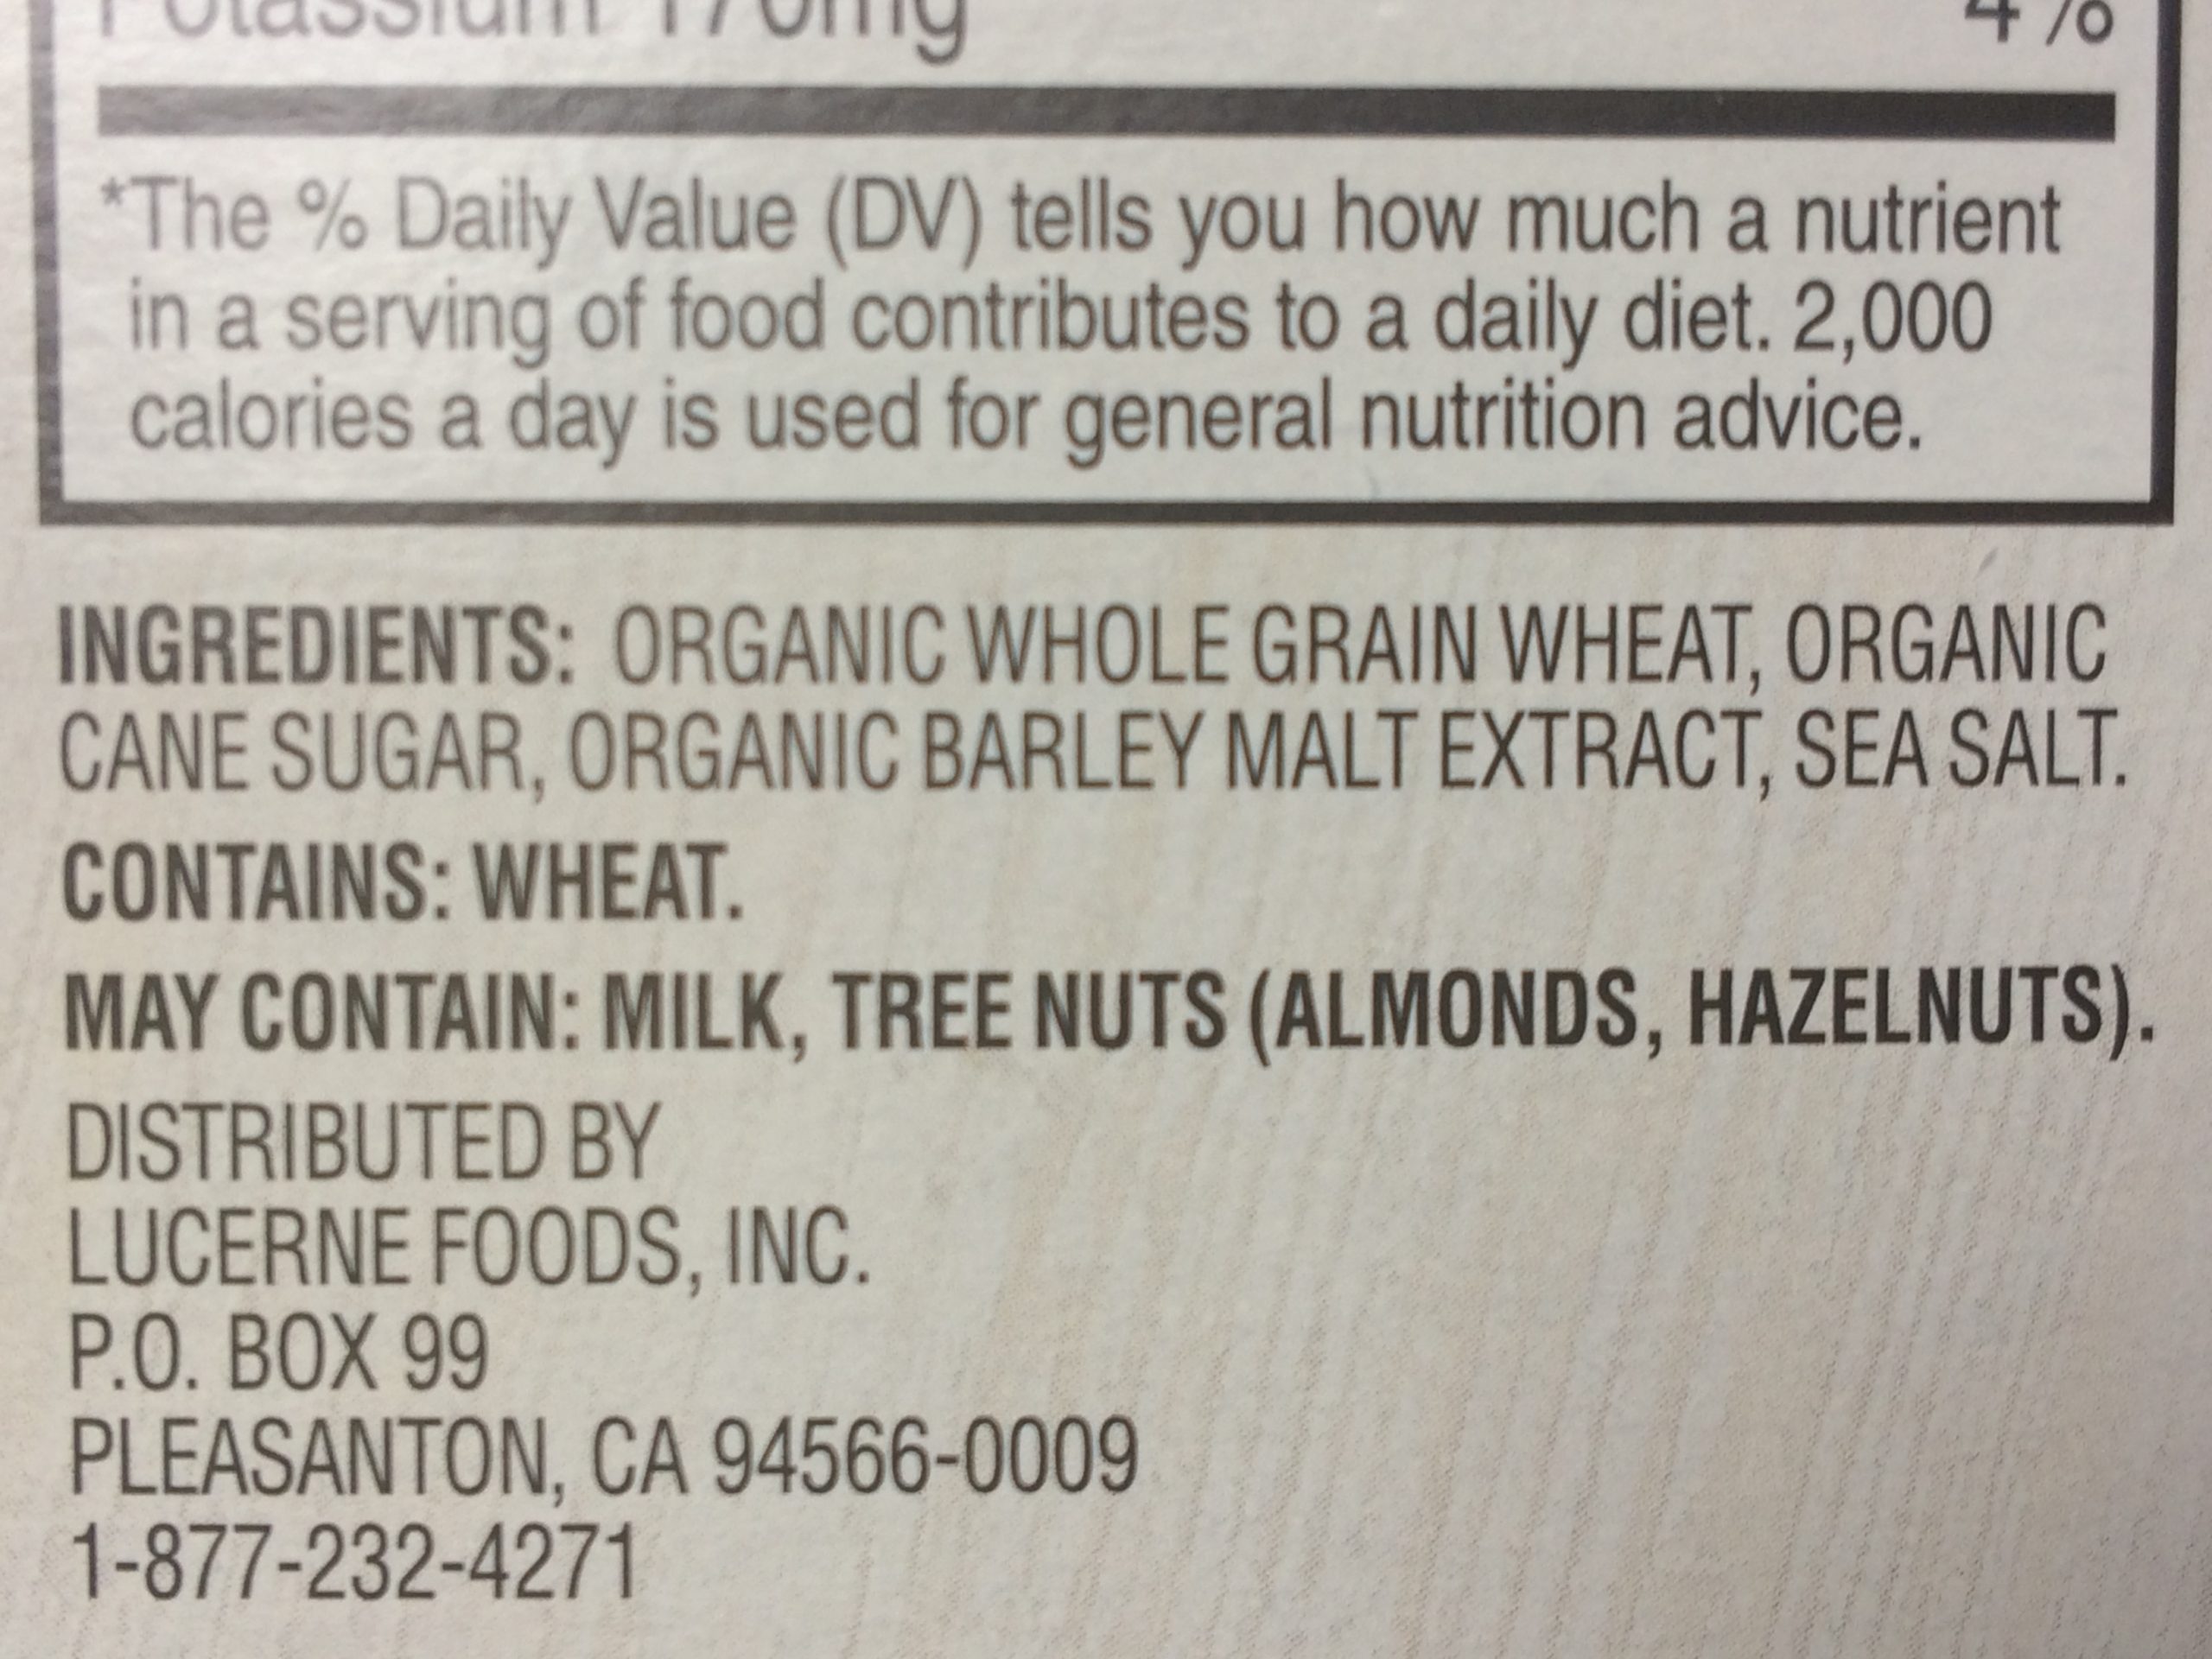 Ingredient list from a cereal box, with an allergen warning